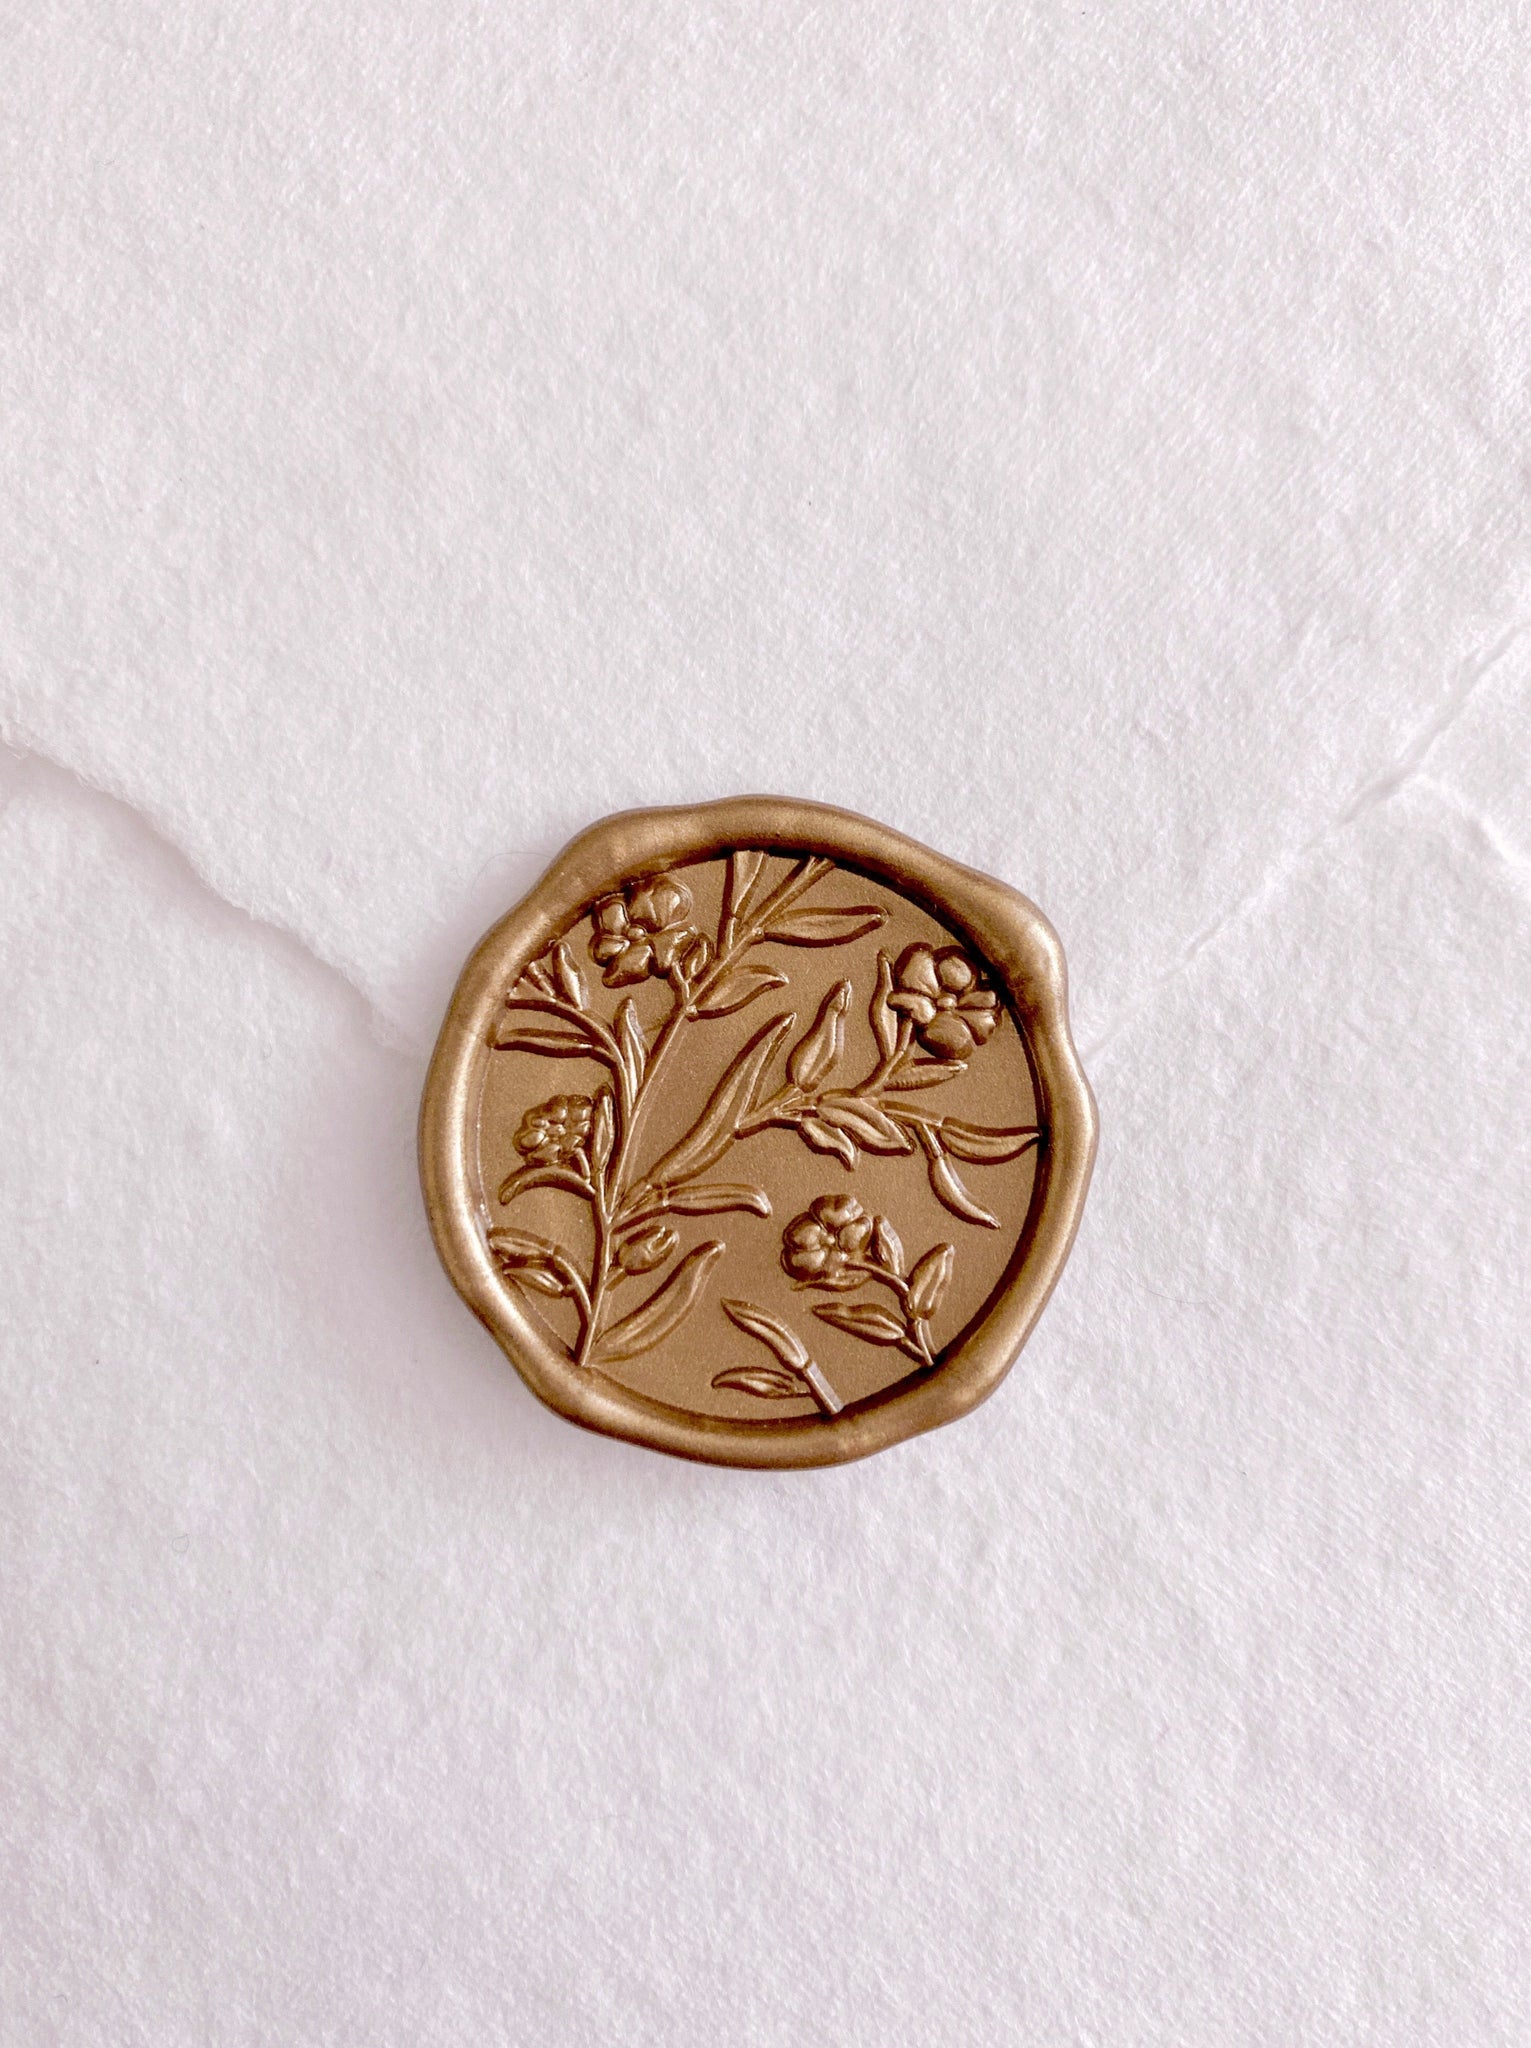 3D floral gold wax seal on handmade paper envelope_closeup front angle